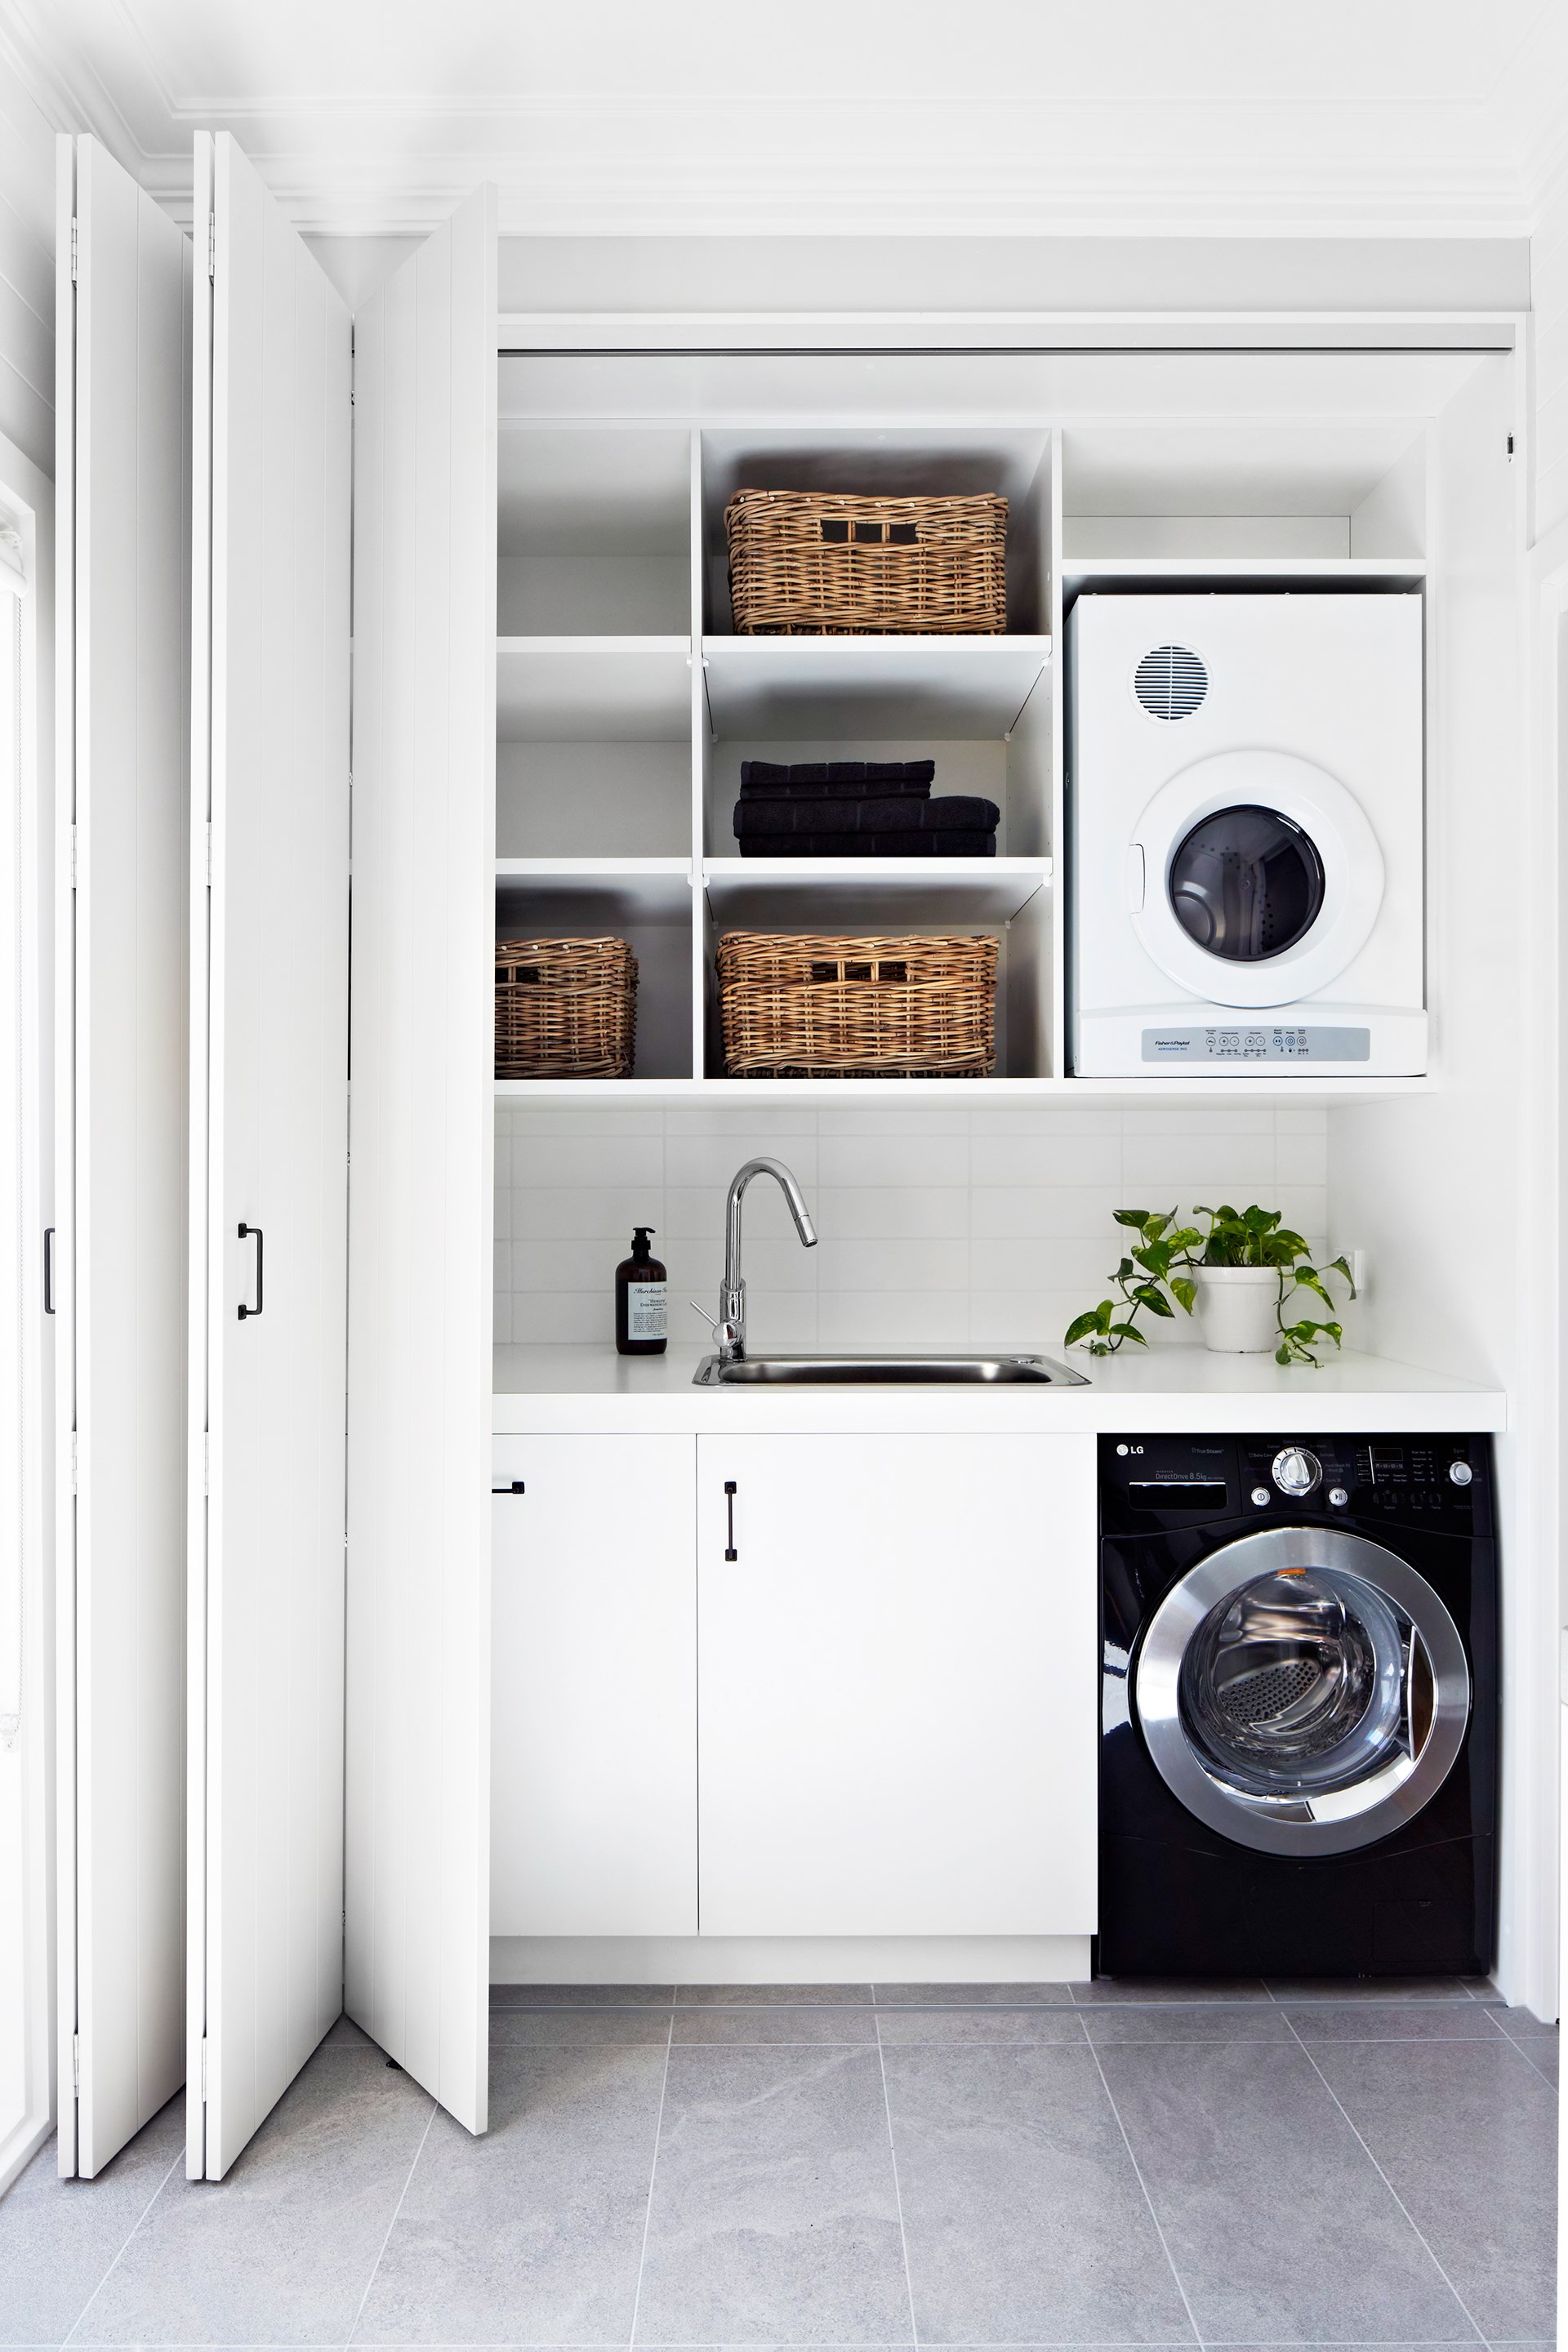 Keeping a [small laundry](https://www.homestolove.com.au/how-to-design-a-small-space-laundry-5269|target="_blank") like this is order means utilising any spare surface area for storage with built-in shelves, baskets and hooks. *Photo:* Armelle Habib / *Australian House & Garden*